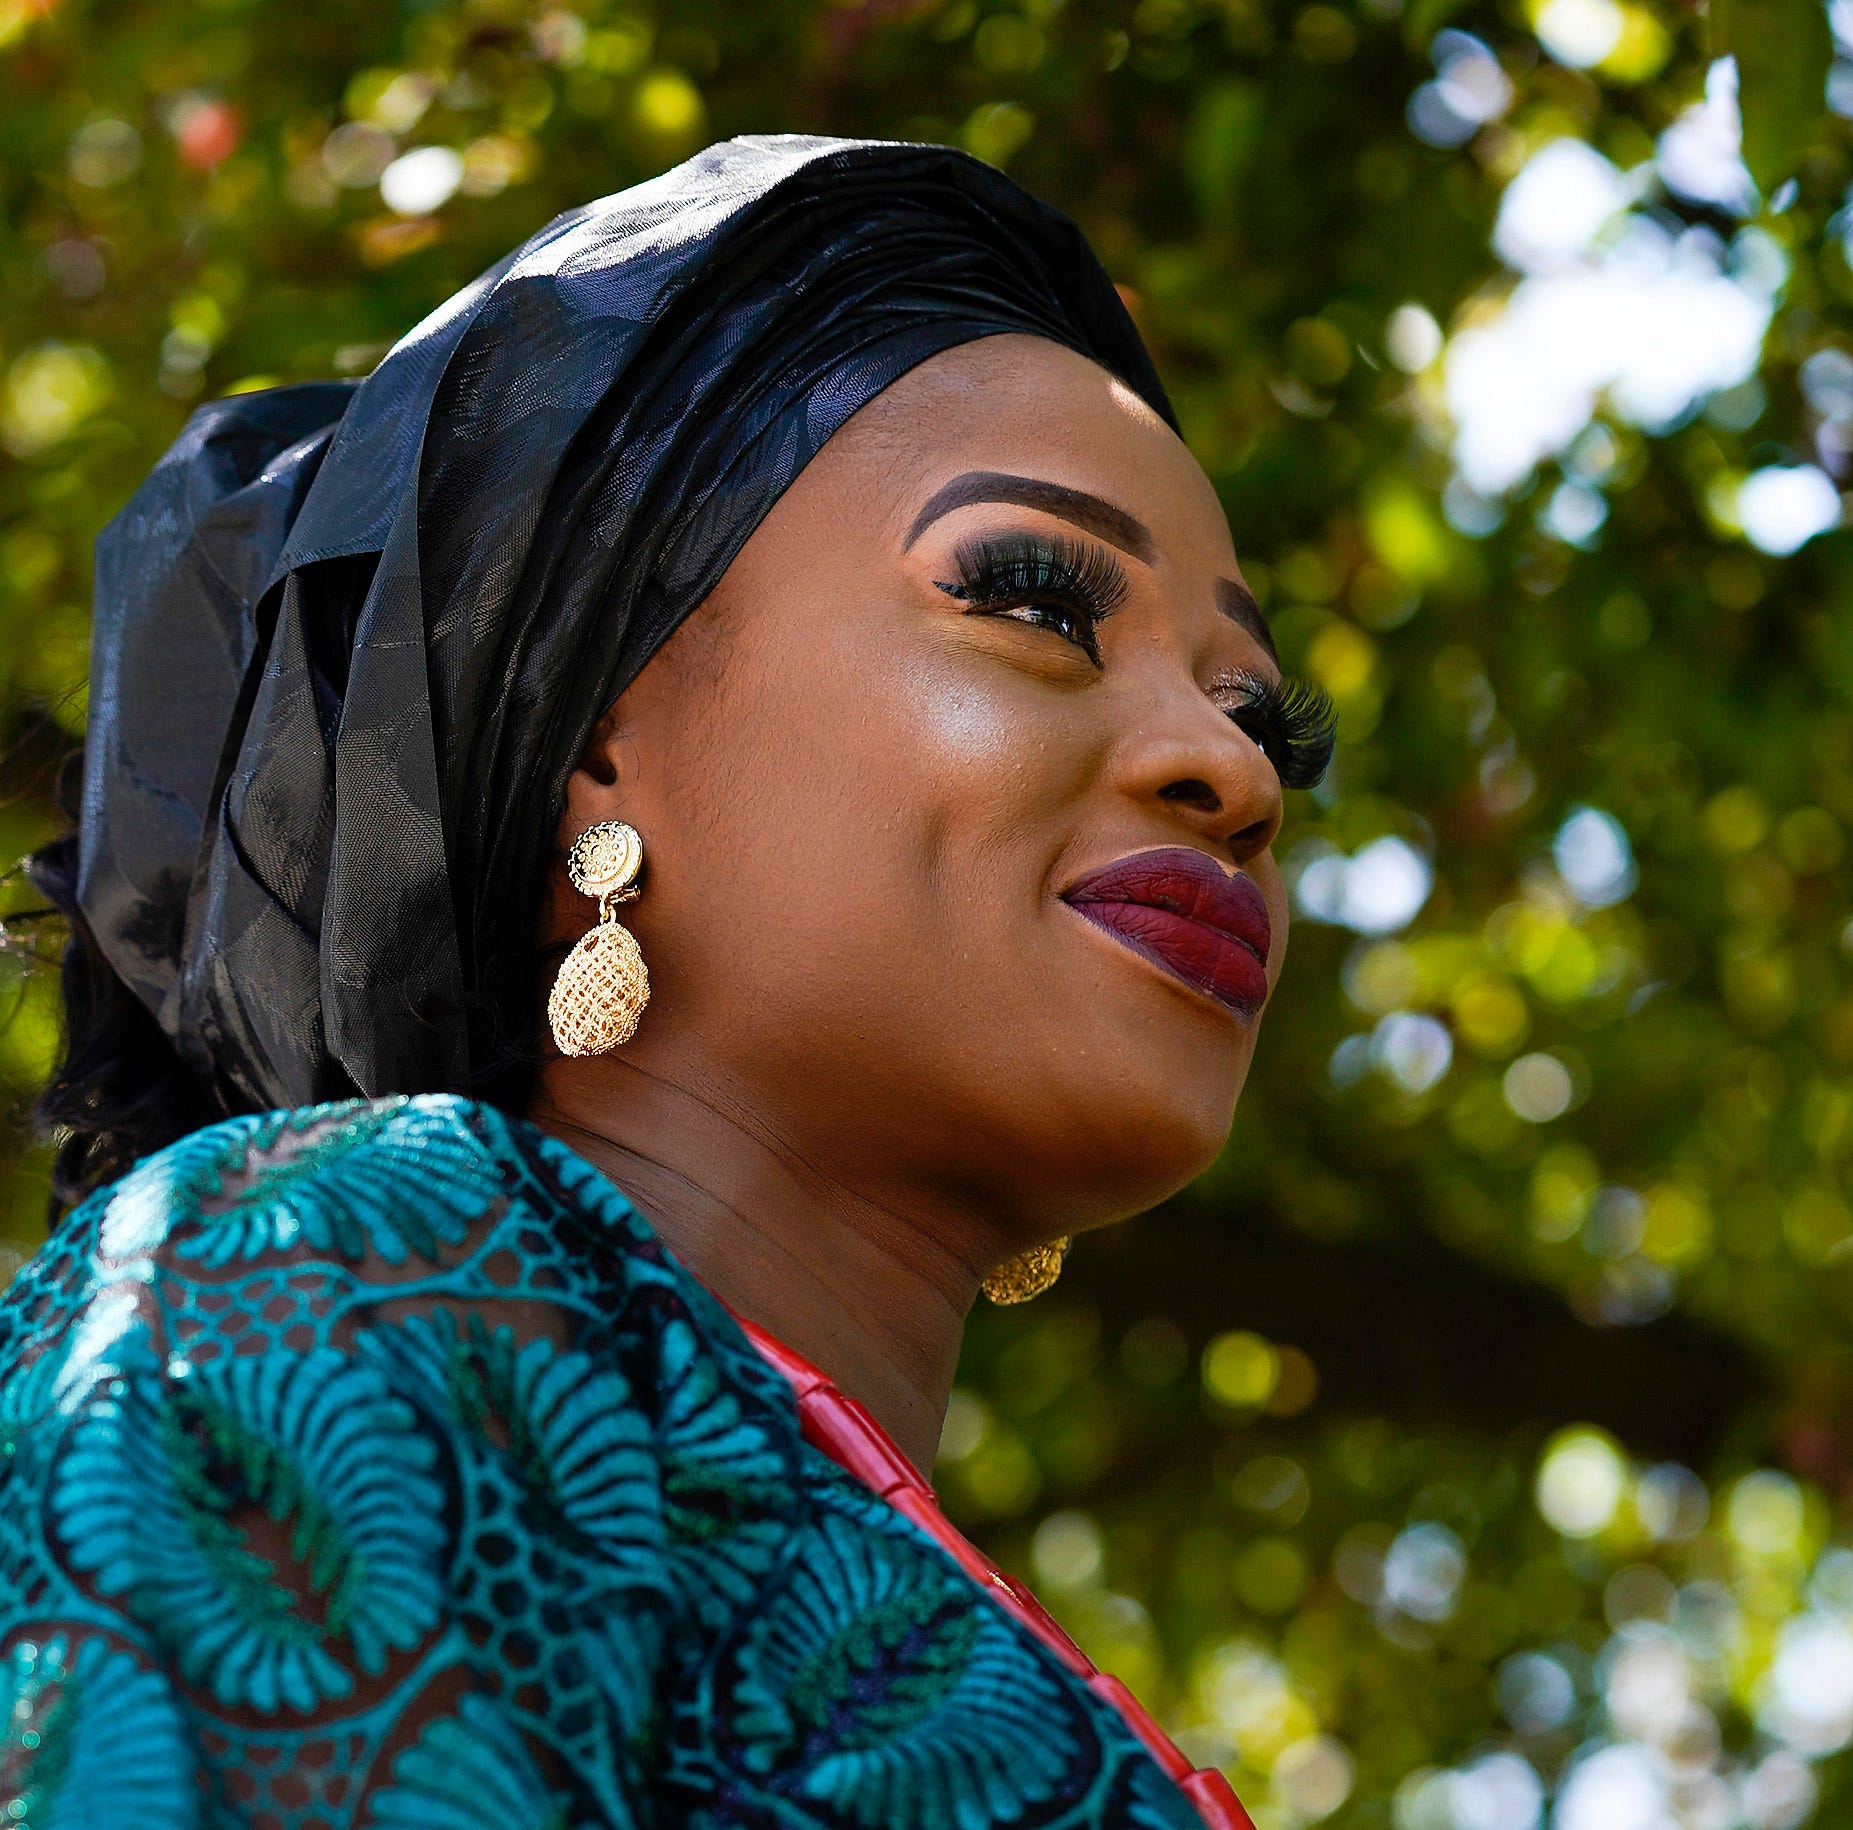 Omobola Afolayan, 40, is a protector. Afolayan moved to Indianapolis from Nigeria in 2019 with her husband and two sons, now 9 and 12, to live a life without persecution. Her family is Christian and with the rise of Boko Haram, an Islamist group that has killed thousands of people and displaced millions, Omobola made the decision to come to the United States to find safety and peace. Afolayan poses for a portrait, Tuesday, April 27, 2021, outside her home in Indianapolis. Omobola's mother said women are nation builders. ÒWhen you have freedom,Ó Afolayan said, Òappreciate it.Ó